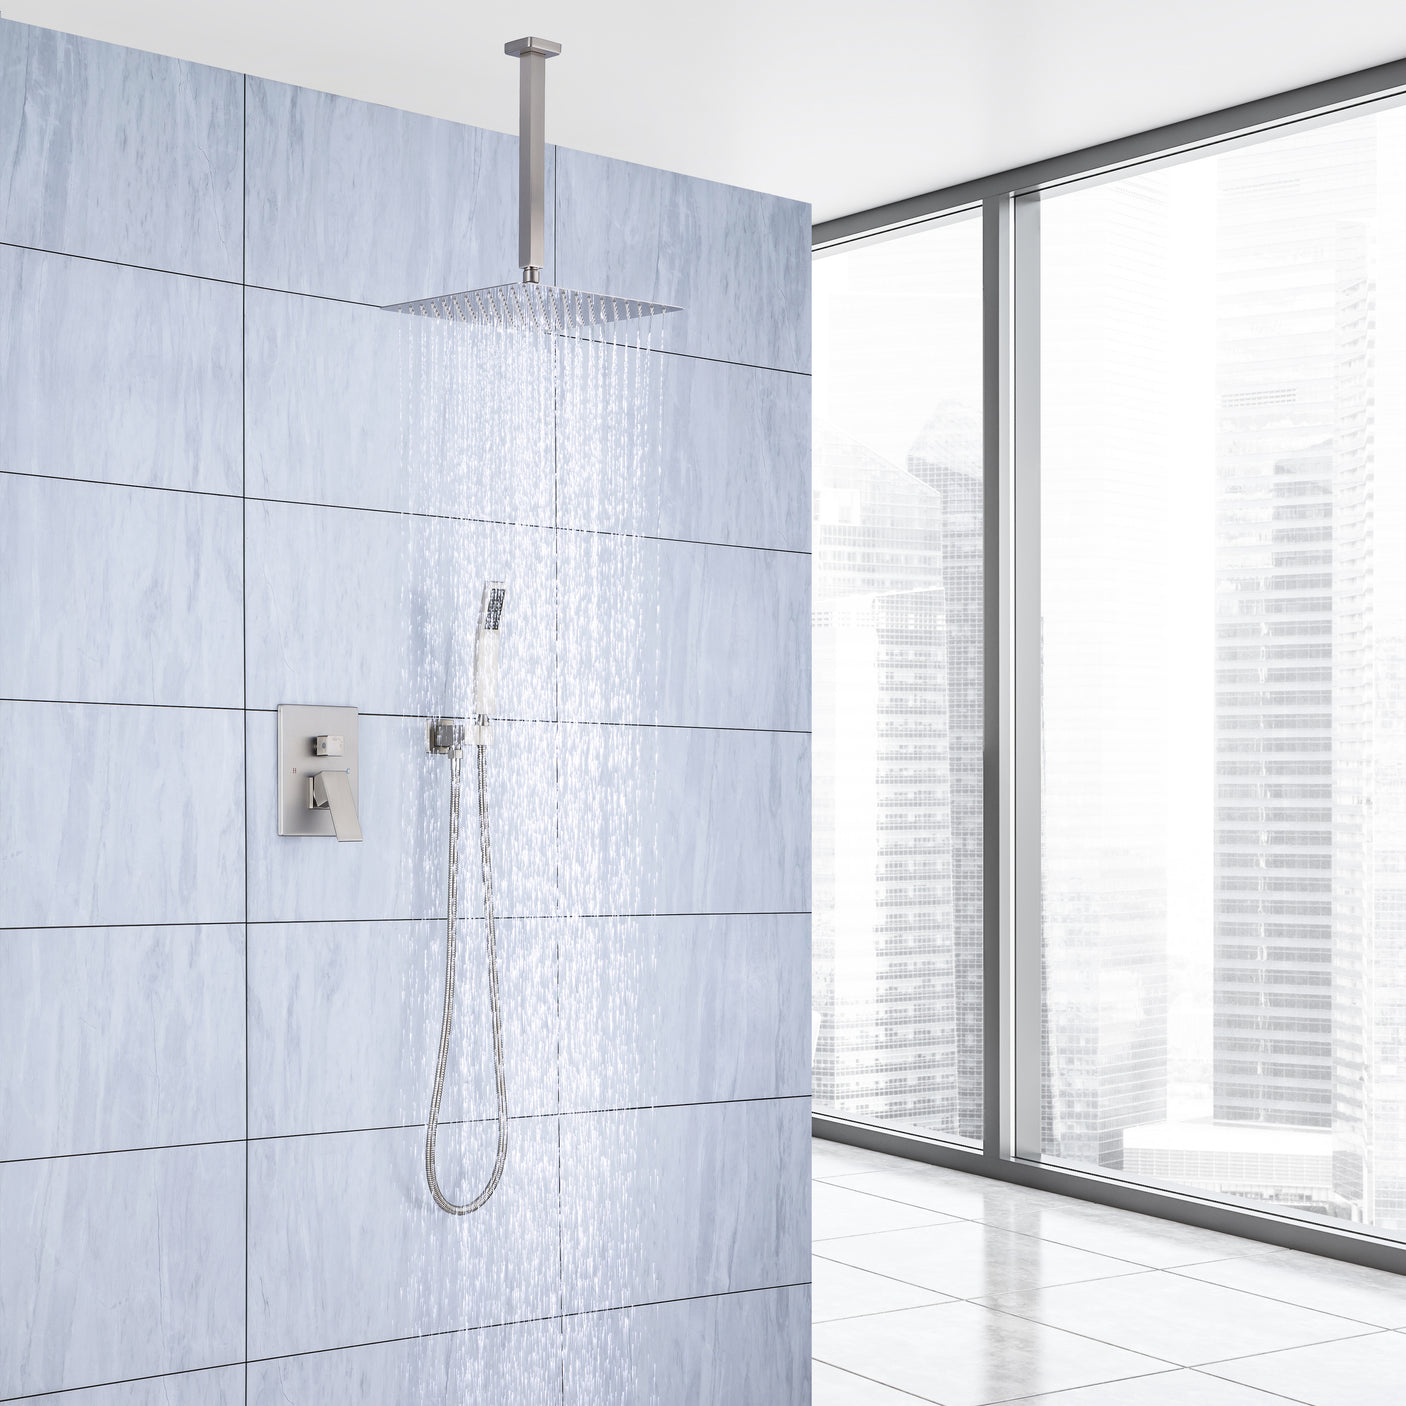 12 inch Ceiling Shower System Brushed Nickel Shower Combo Set for Bathroom, Rainfall Shower Faucet Ceiling Mounted Included Rough in Mixer Valve Body and Trim